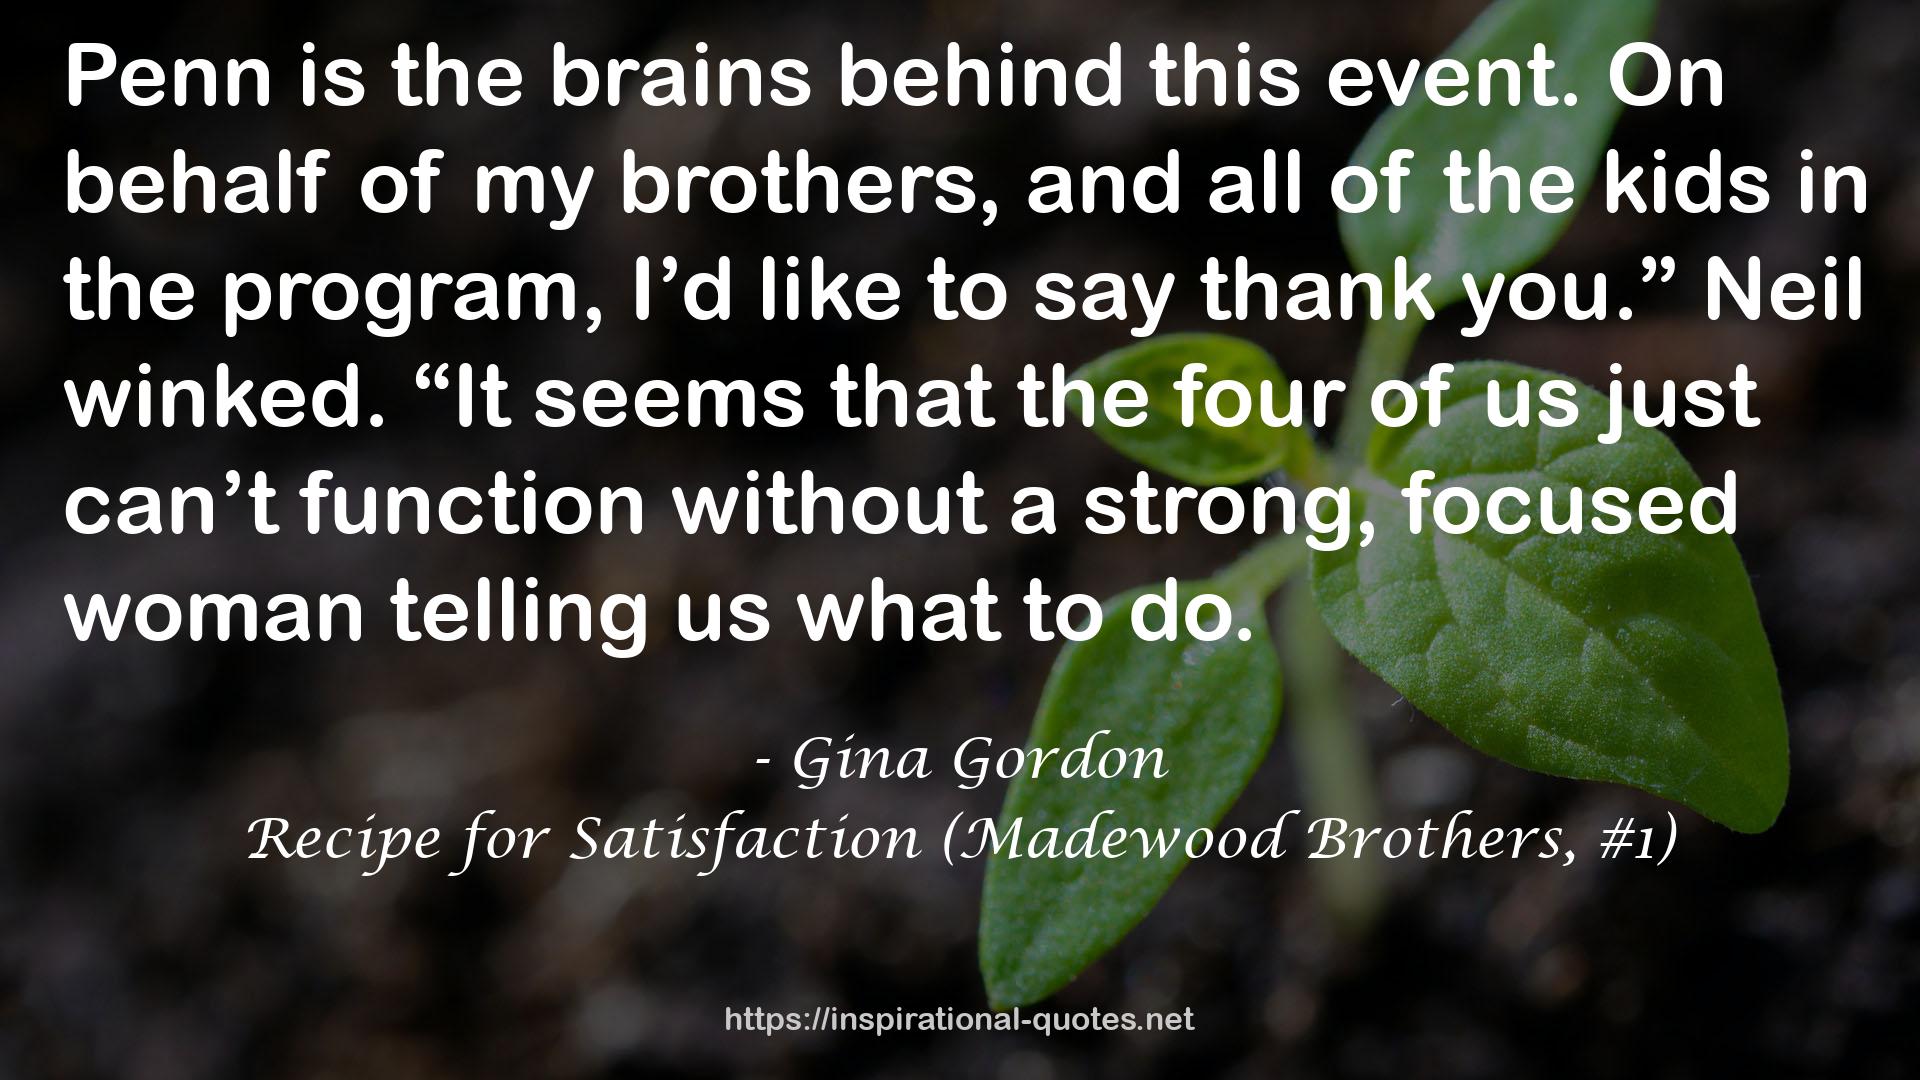 Recipe for Satisfaction (Madewood Brothers, #1) QUOTES